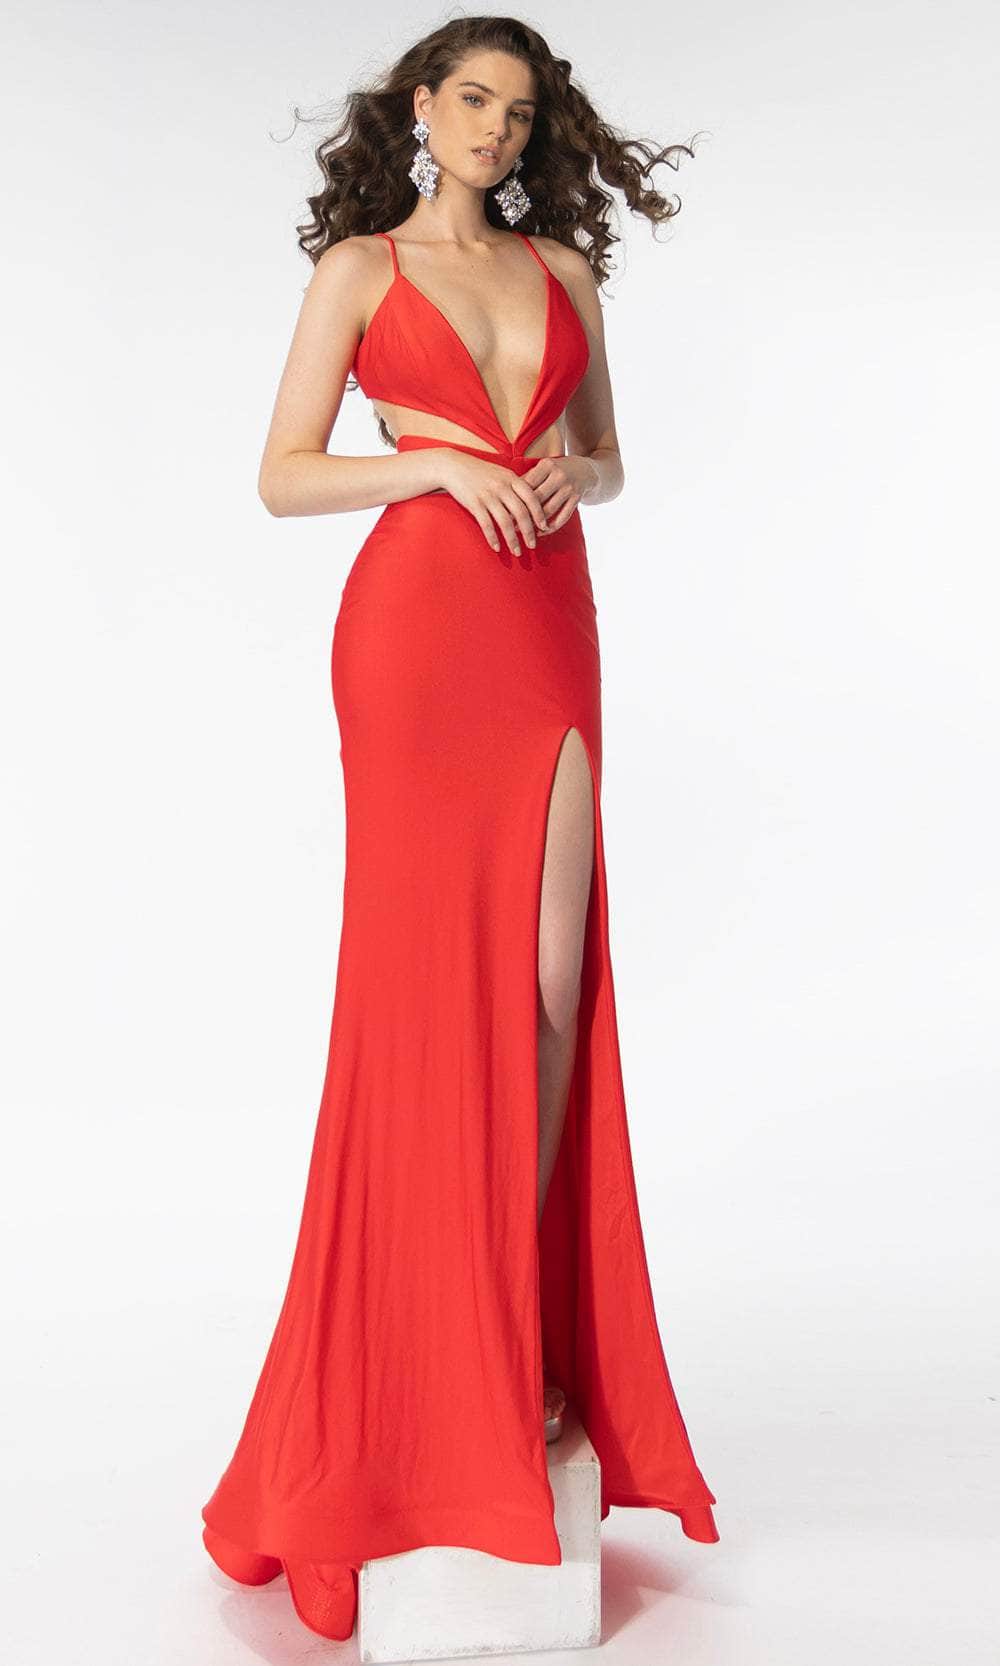 Image of Ava Presley 39311 - Spaghetti Strap High Slit Prom Gown